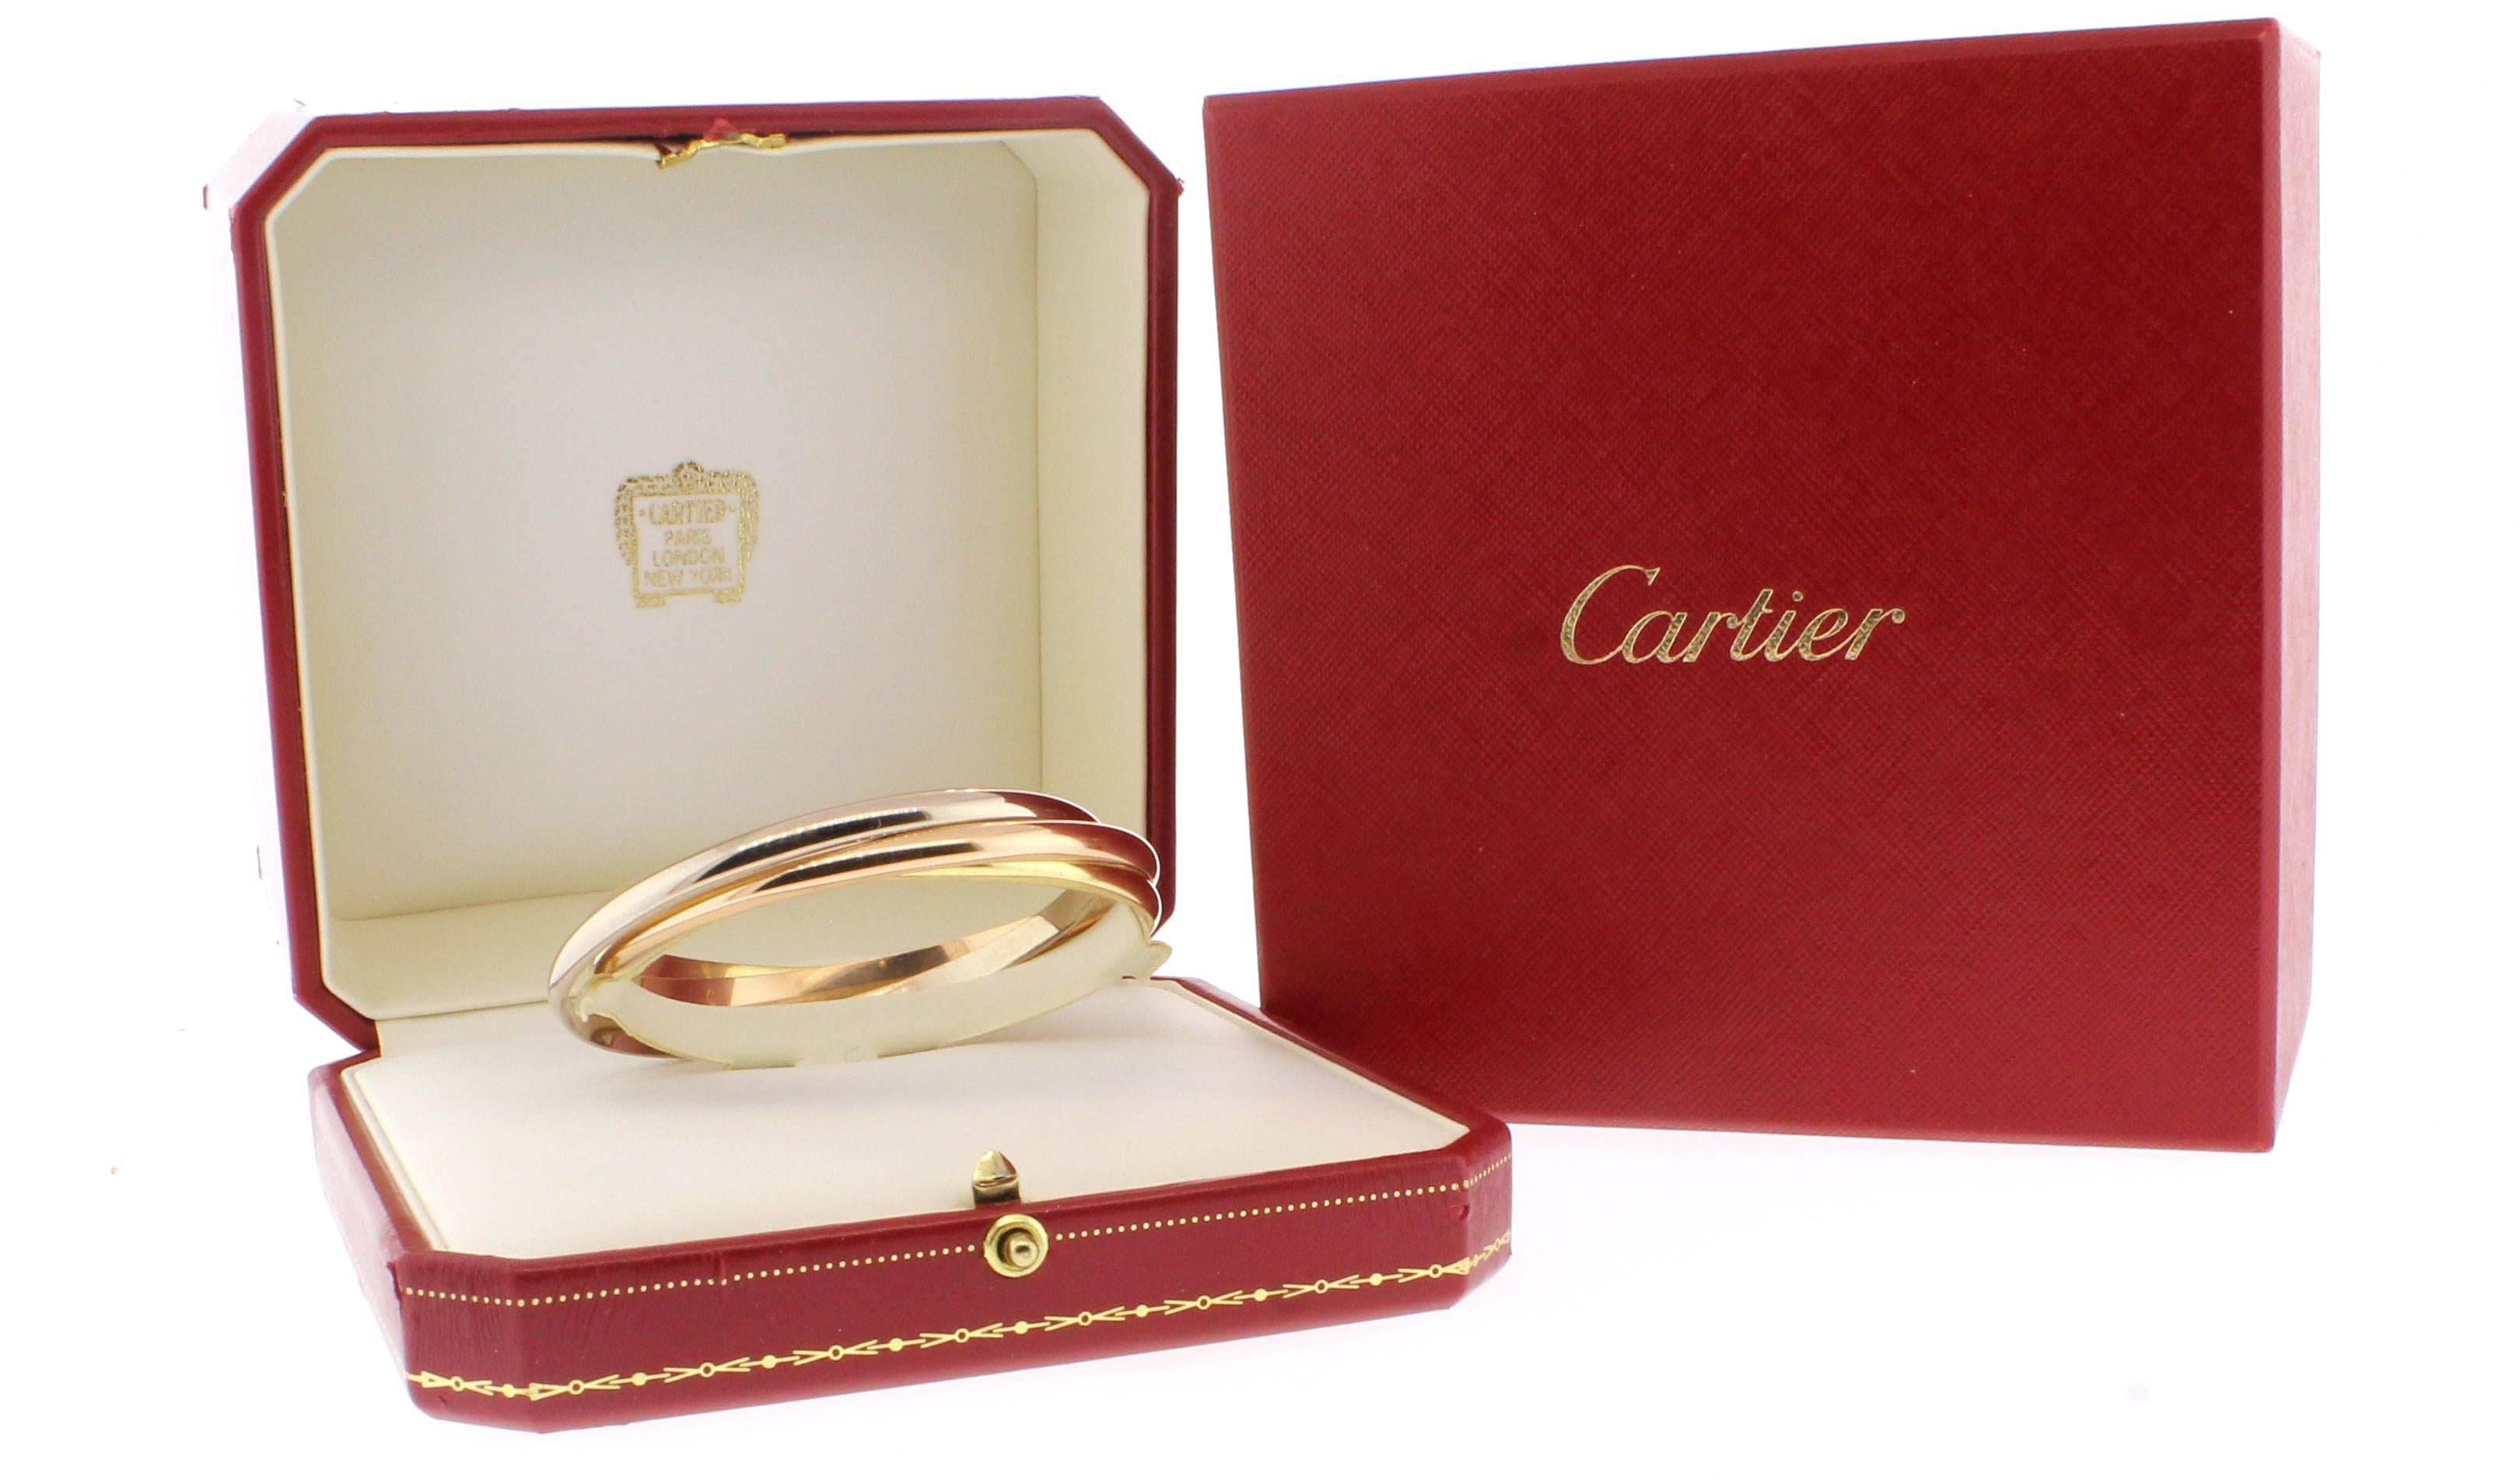 Three bands. Three colors. Pink gold, yellow gold and white gold, intertwined in a display of mystery and harmony. This iconic bangle from Cartier features three   18 karat 4.5mm bangles, encircled for all time. 60.2 grams. Original box, certificate